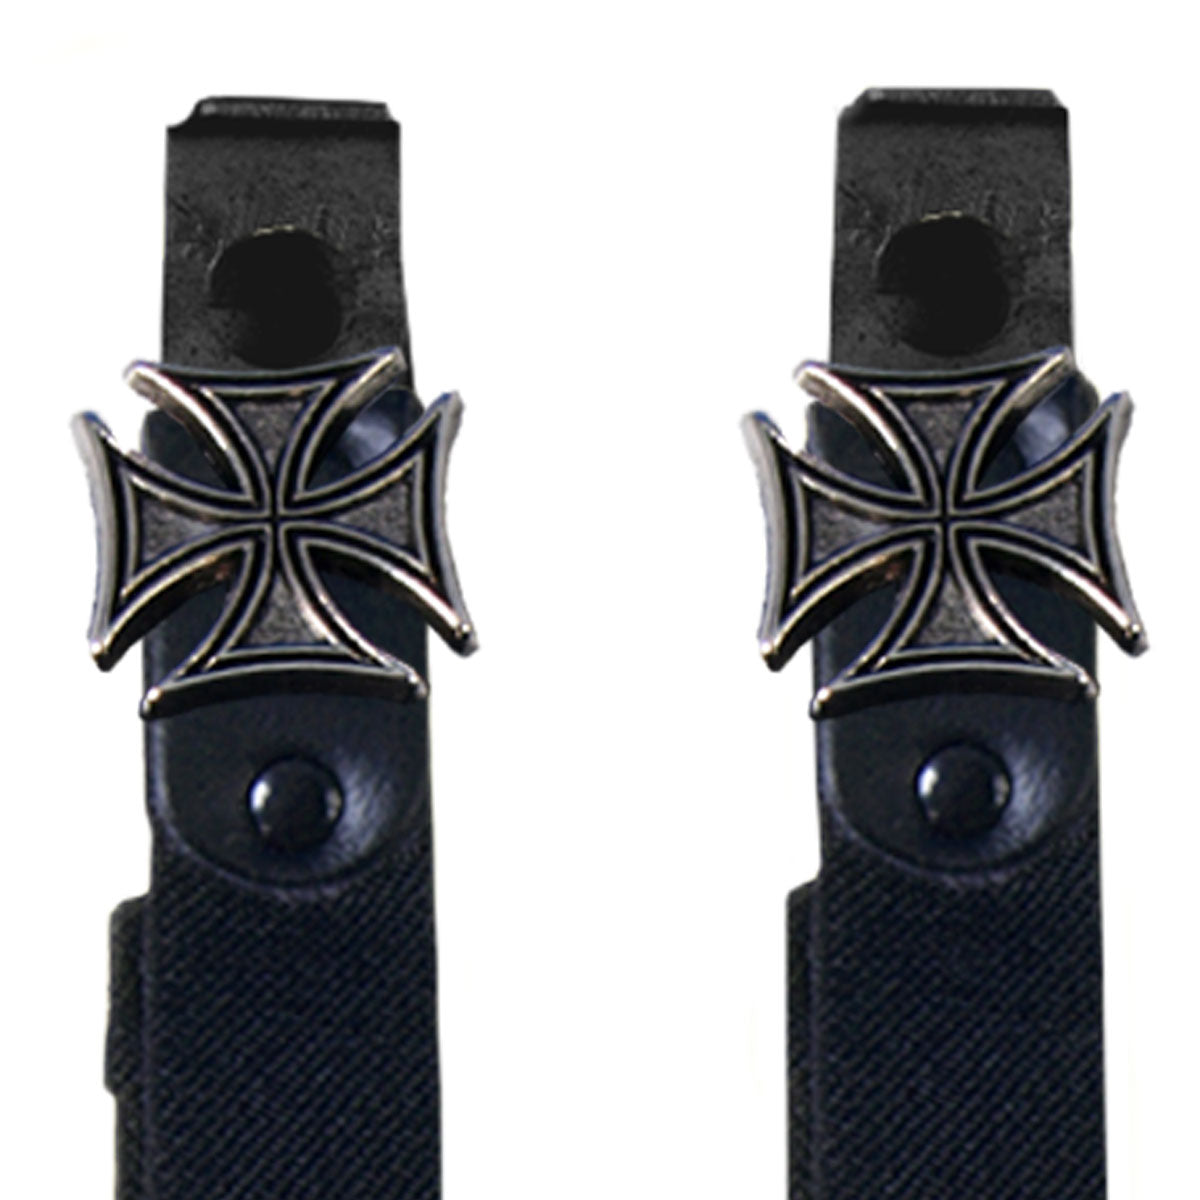 Hot Leathers BUA2013 Iron Cross Motorcycle Riding Pant Clips